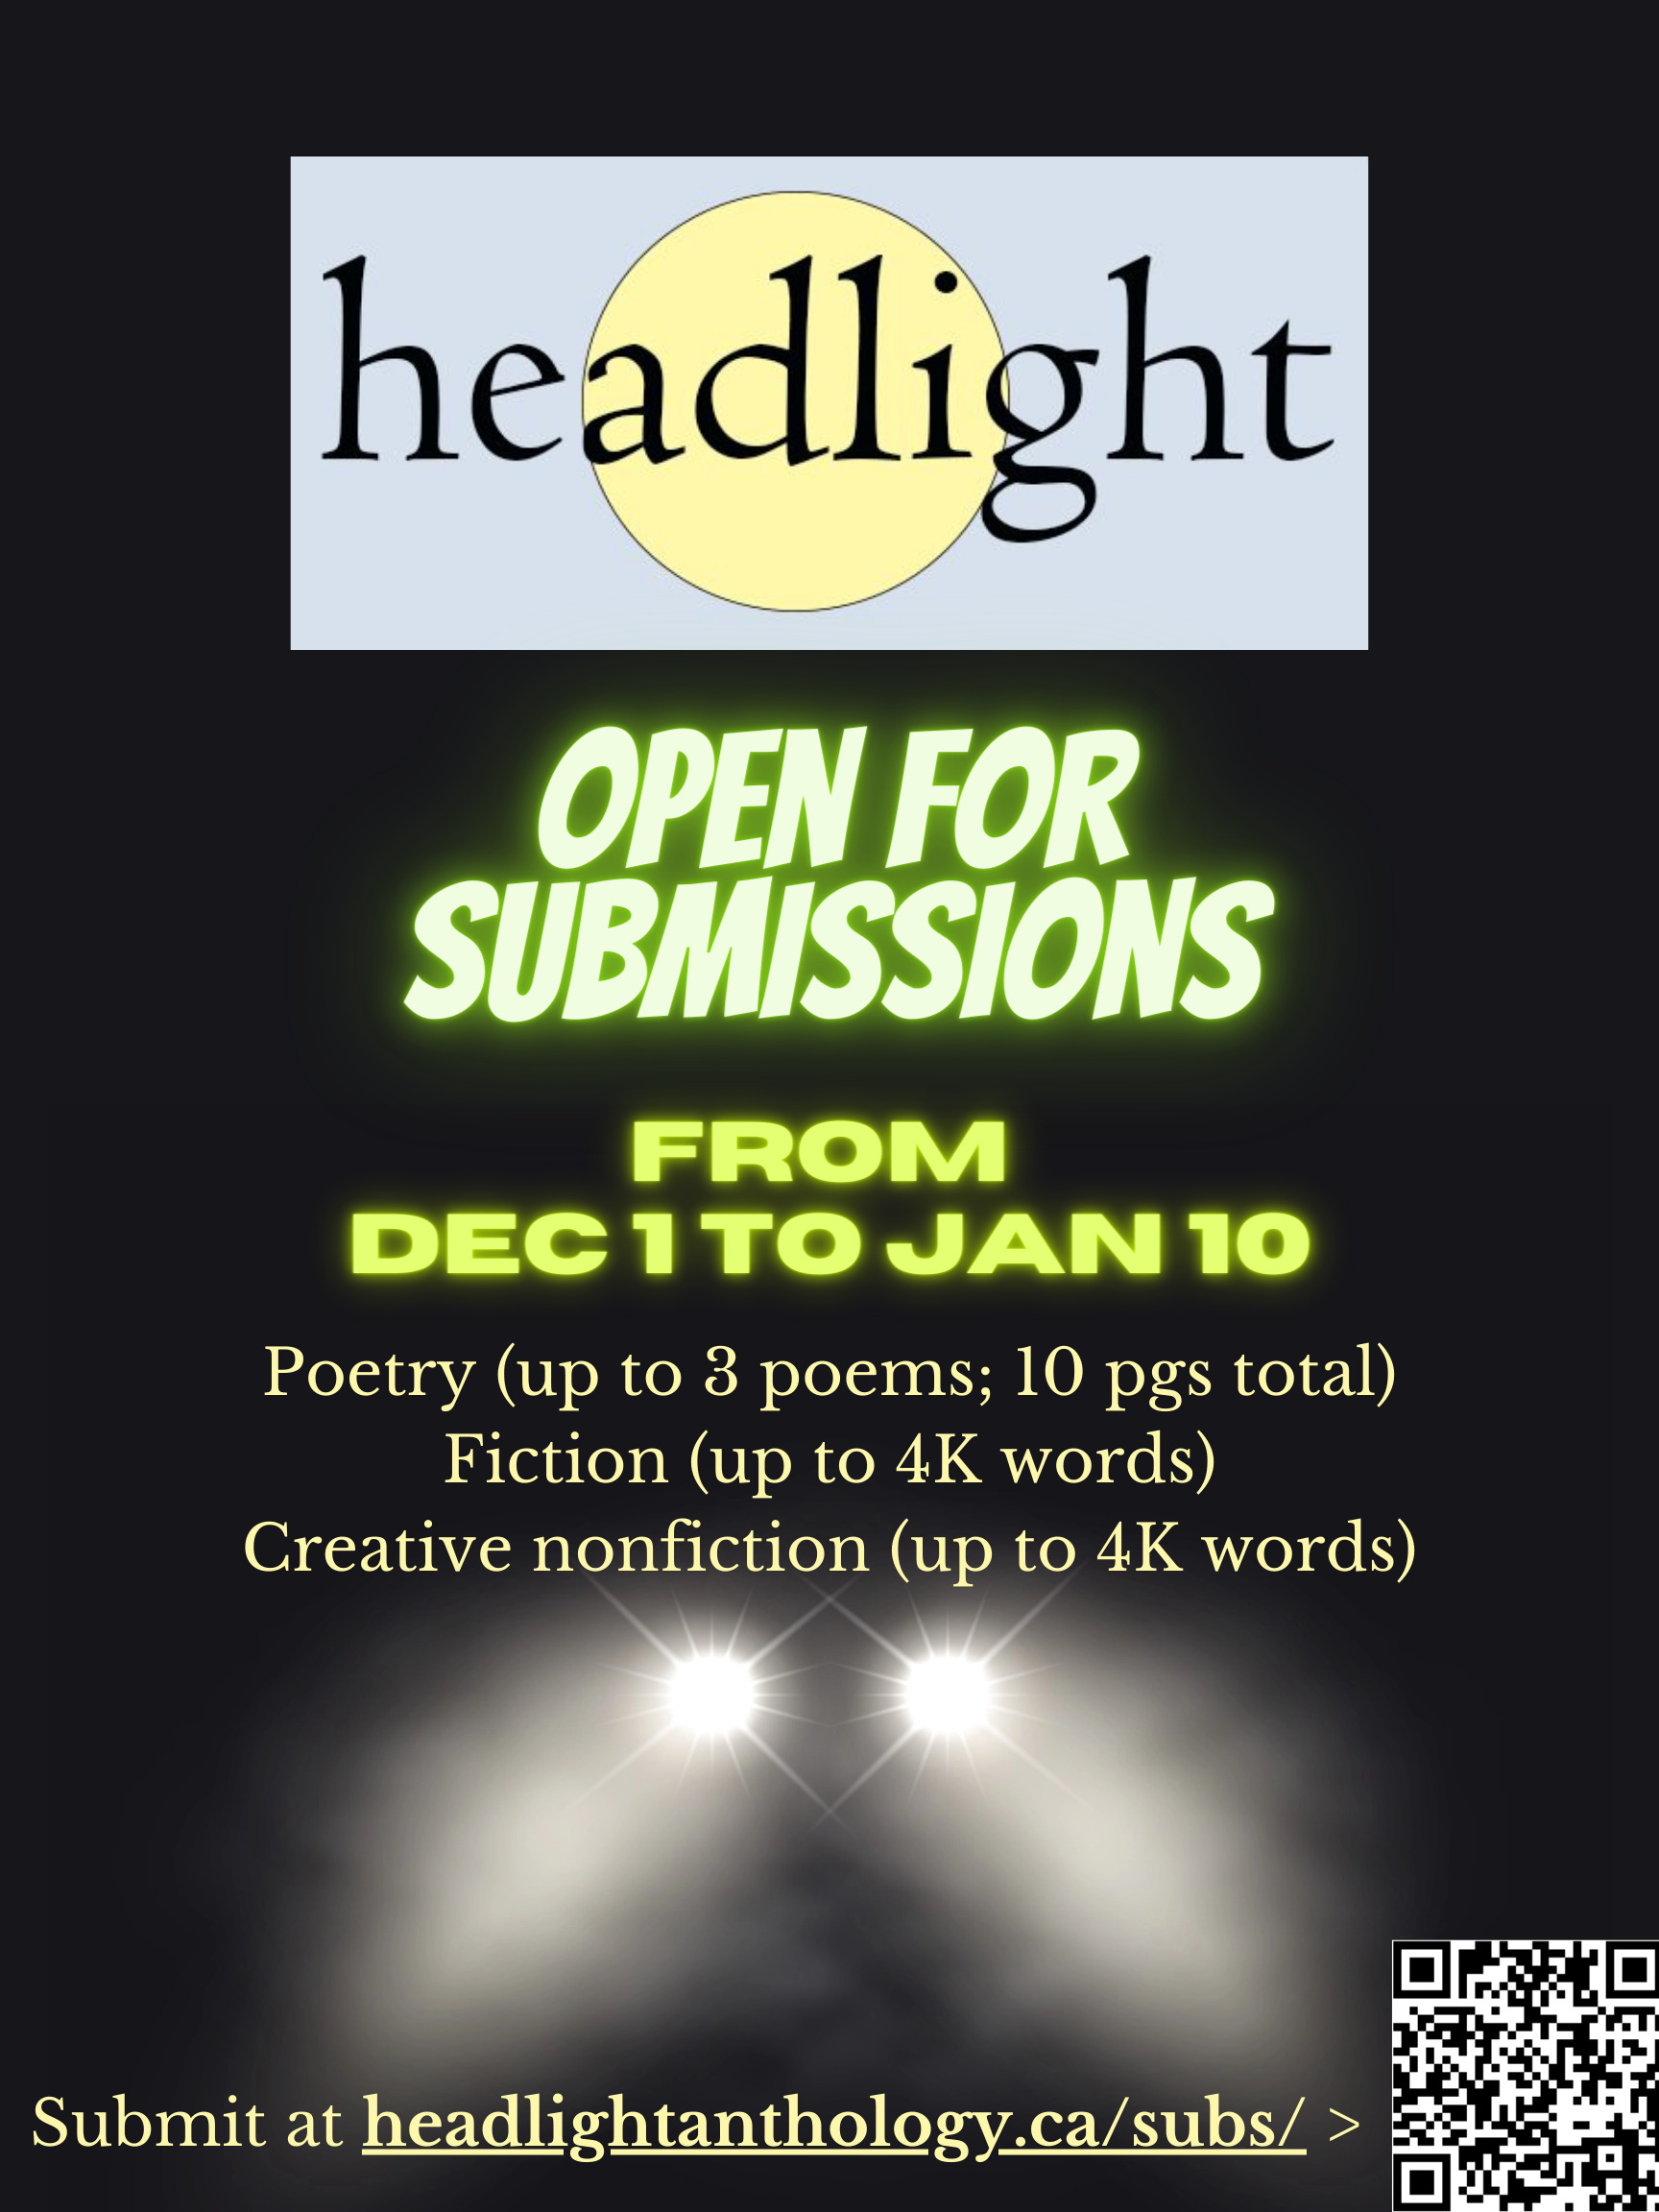 Poster with call for submissions to Headlight Anthology: poetry up to 3 poems or 10 pgs total; fiction up to 4K words; creative nonfiction up to 4K words. The background features the headlights of a car.